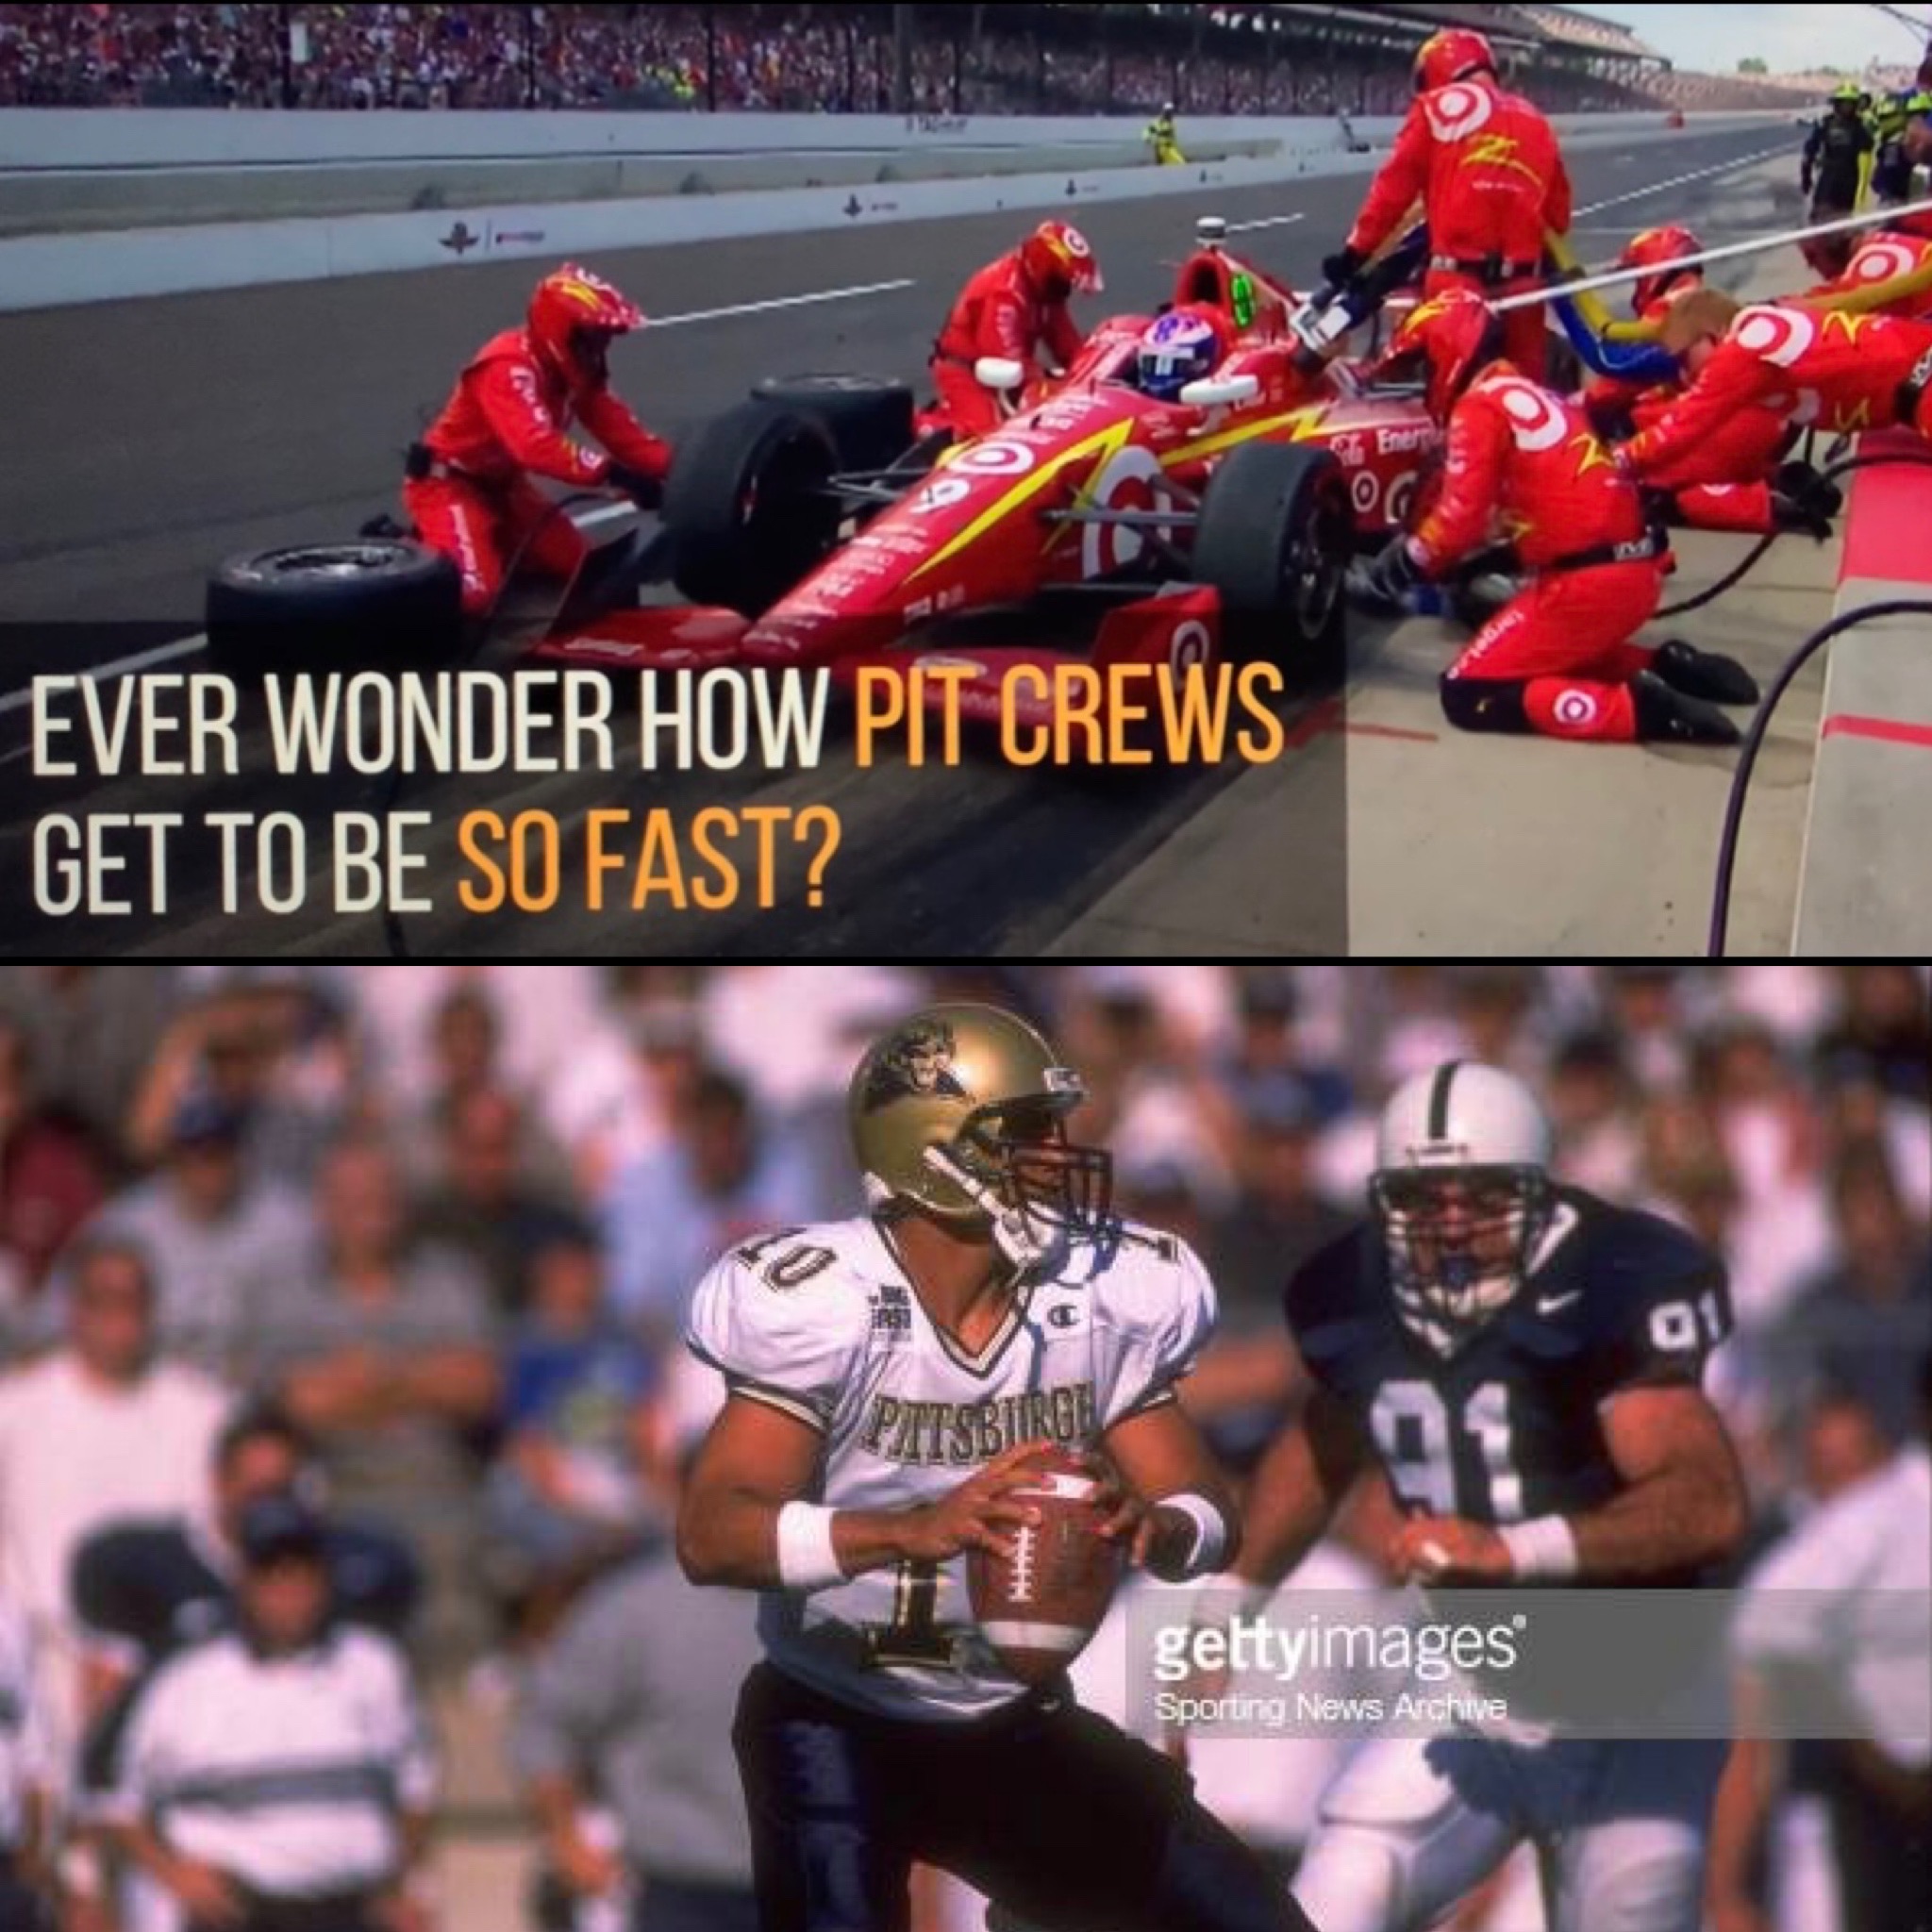 Chris Snyder, NFL- New York Giants, Carolina Panthers… AFL- Indianapolis & Denver… Defensive End- Penn State | Strength & Conditioning Coach- Training Indy Car Pit Crews with Ganassi Racing in Indianapolis, Indiana